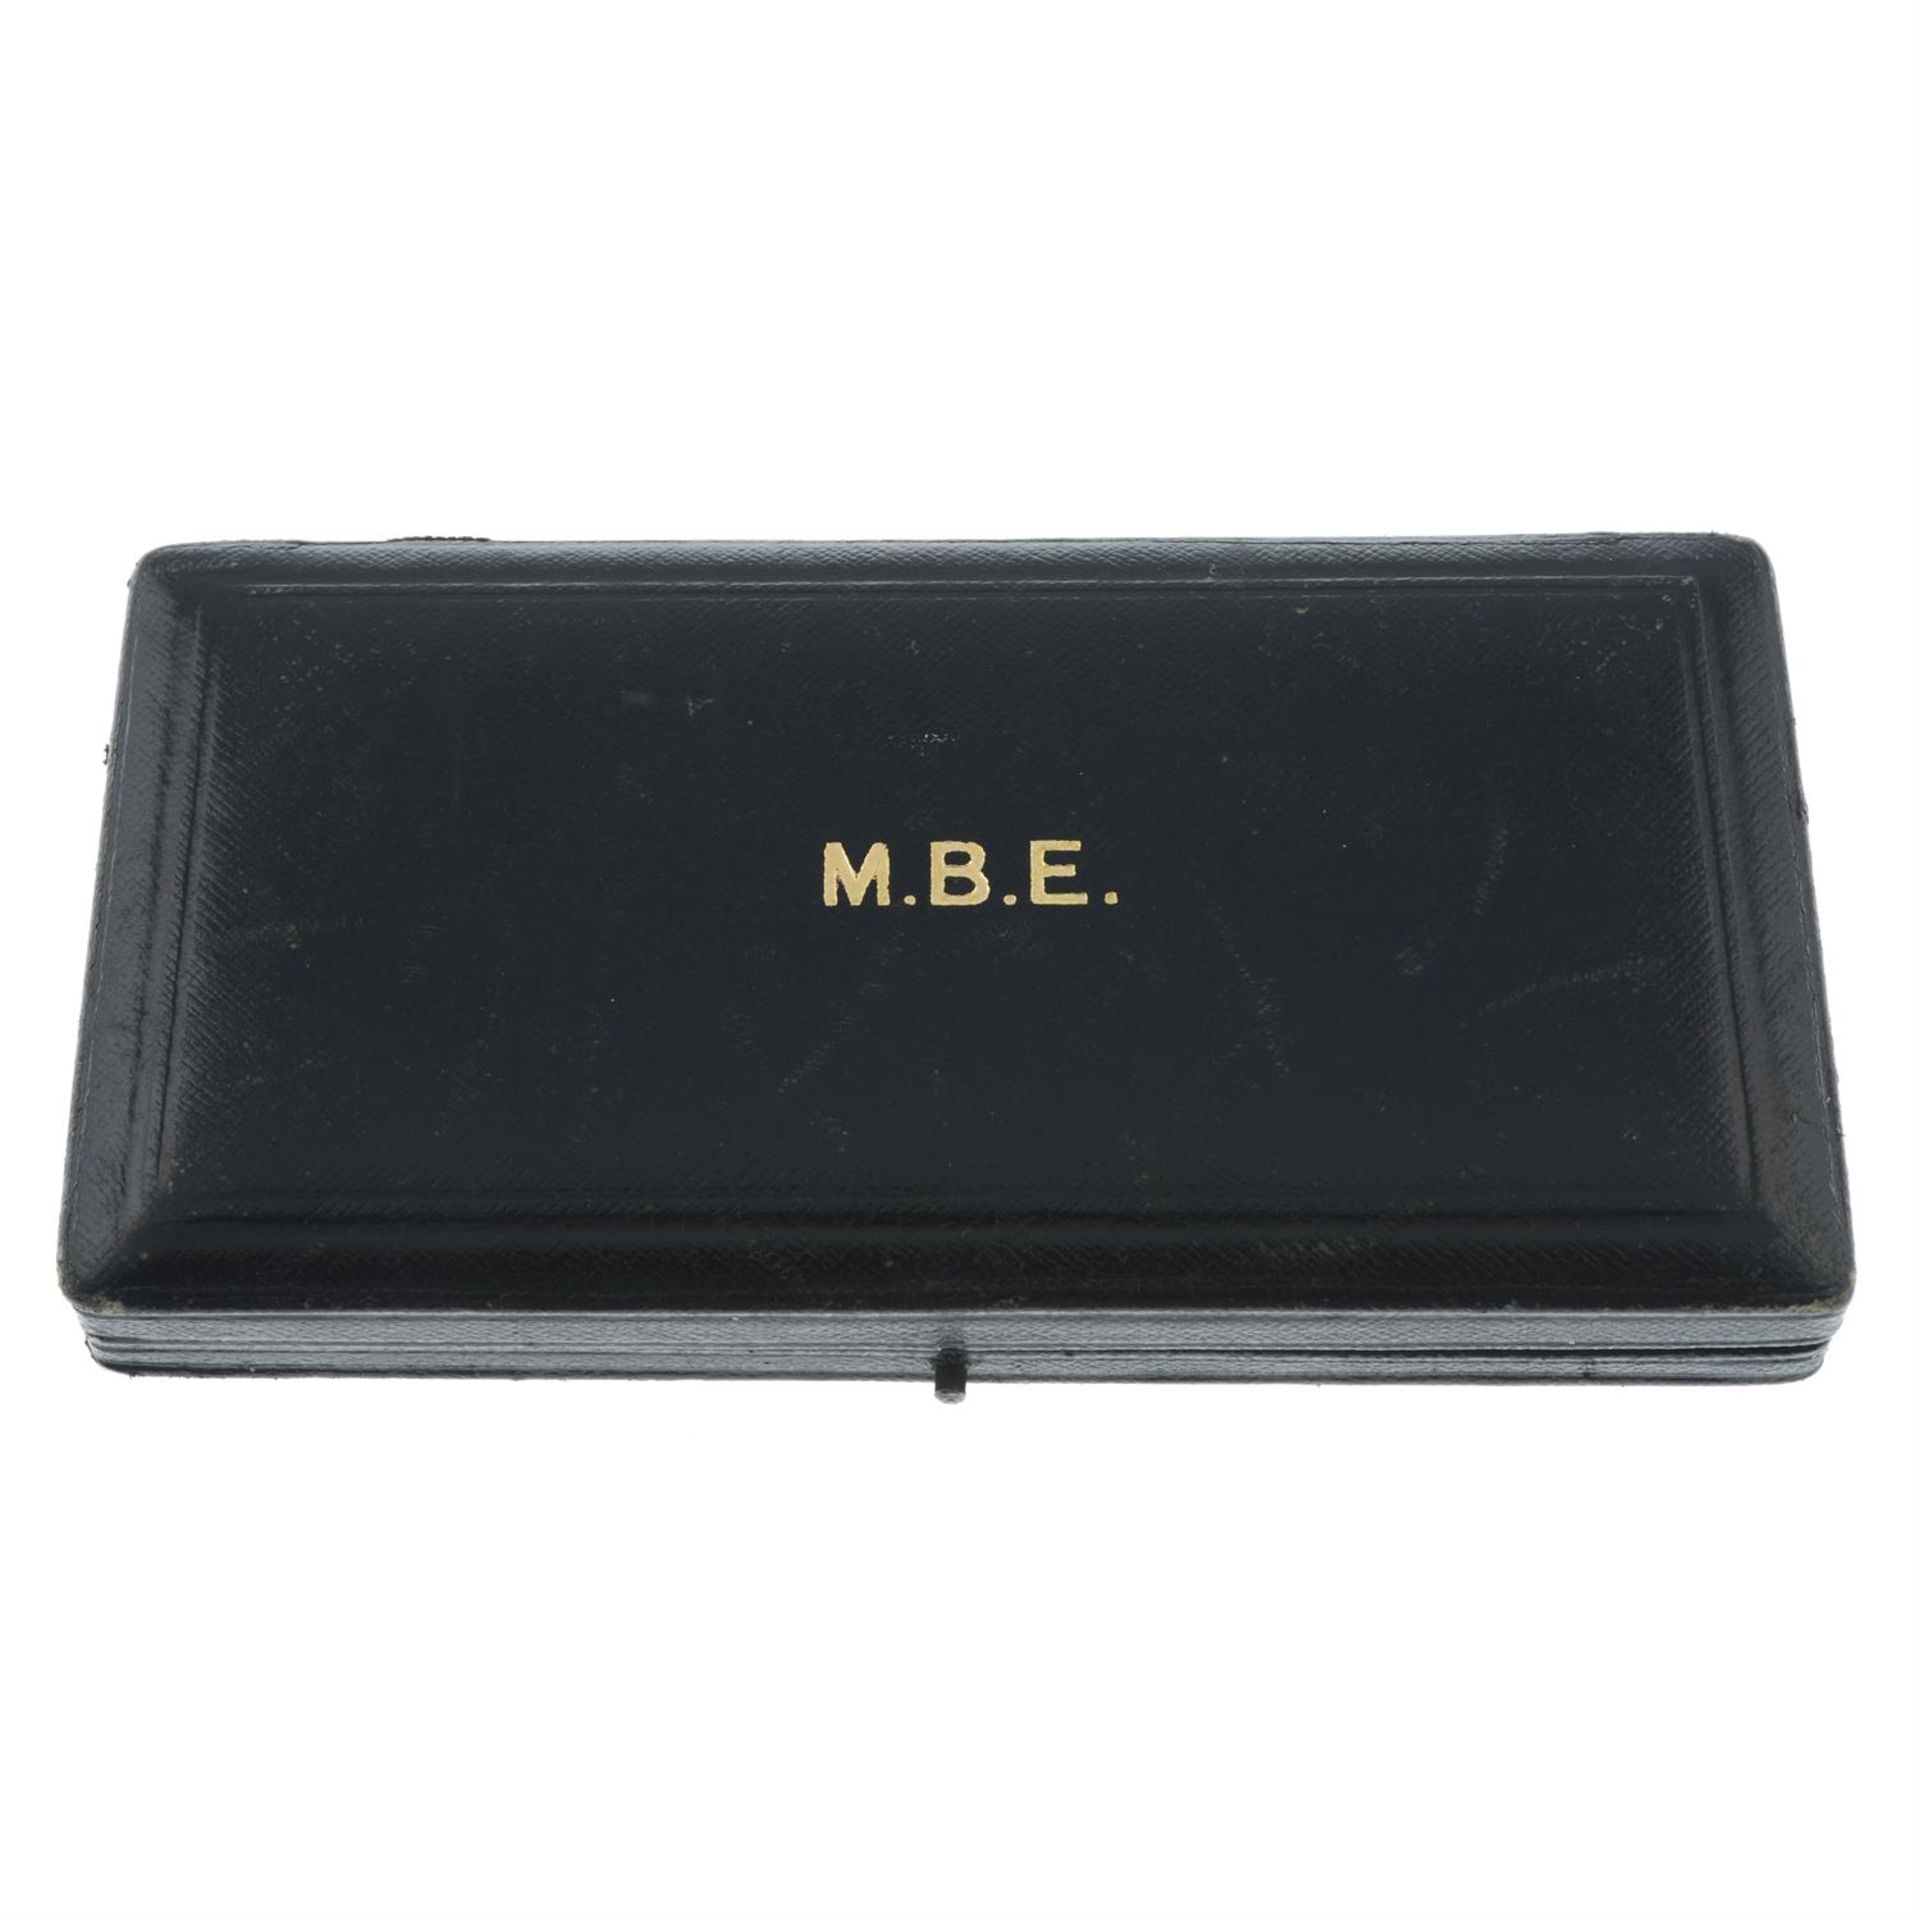 MBE breast badge, Civil, 2nd type, in fitted case. - Image 4 of 4